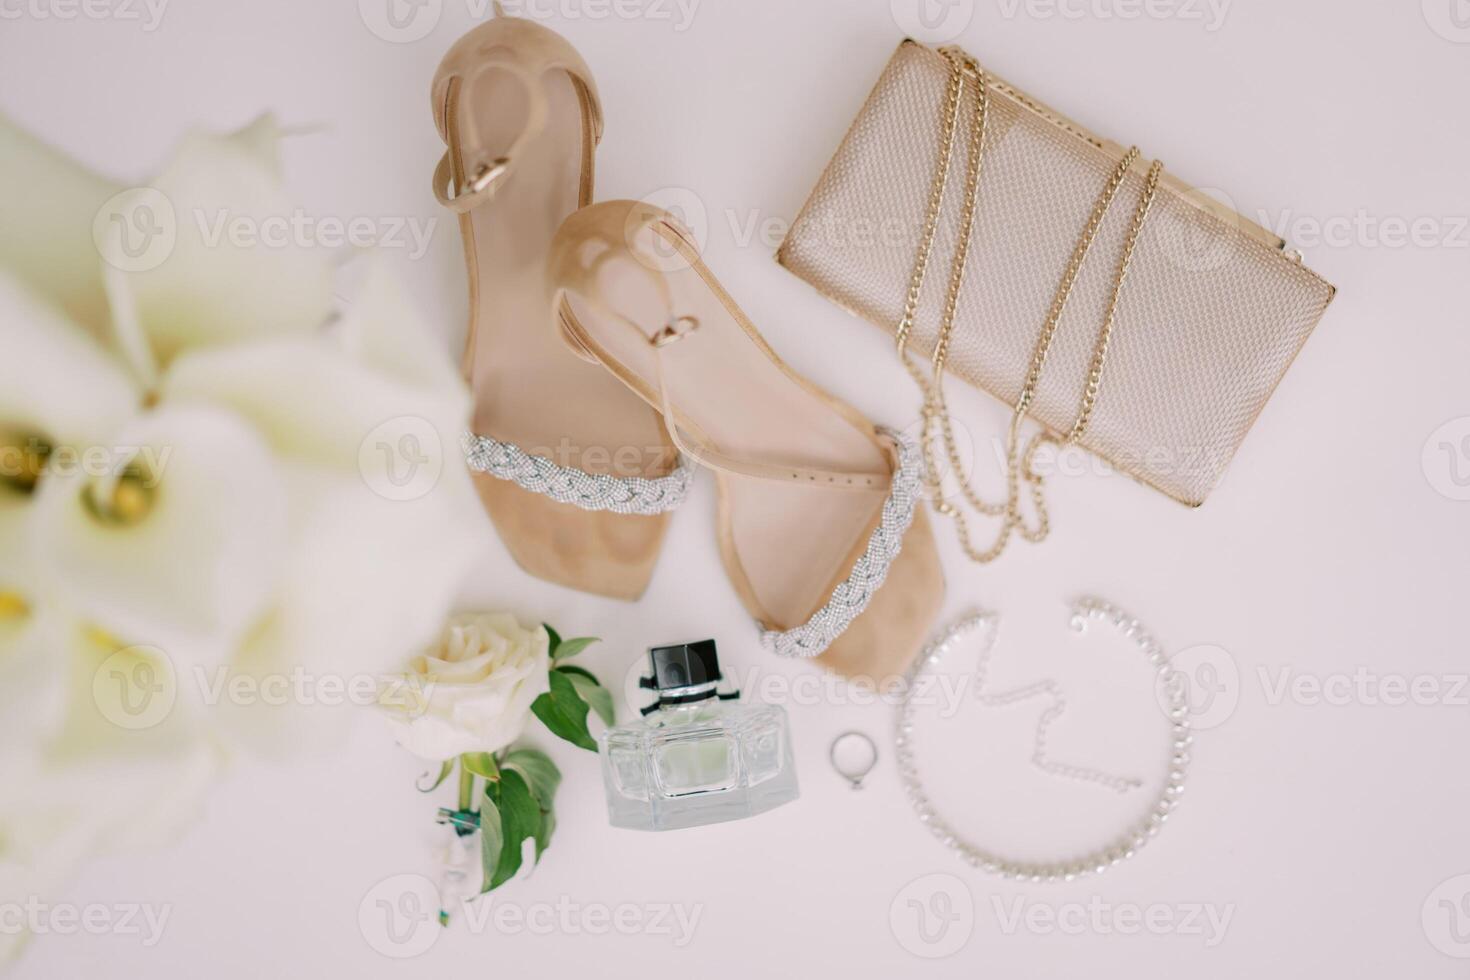 Wedding ring lies on a white table near the bride shoes, handbag and perfume. Top view photo